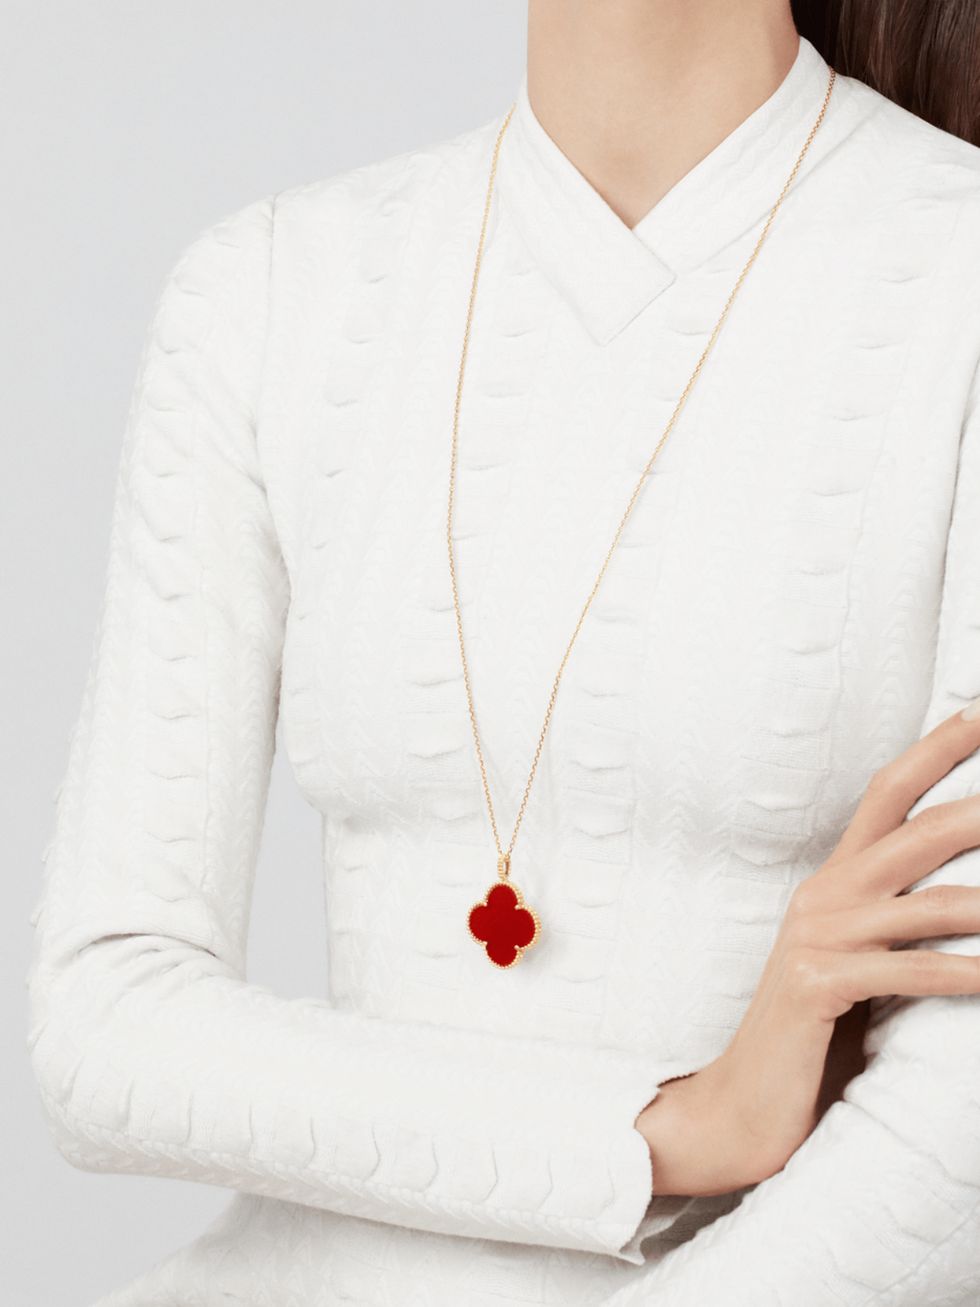 White, Necklace, Neck, Red, Pendant, Fashion accessory, Jewellery, Arm, Outerwear, Beige, 